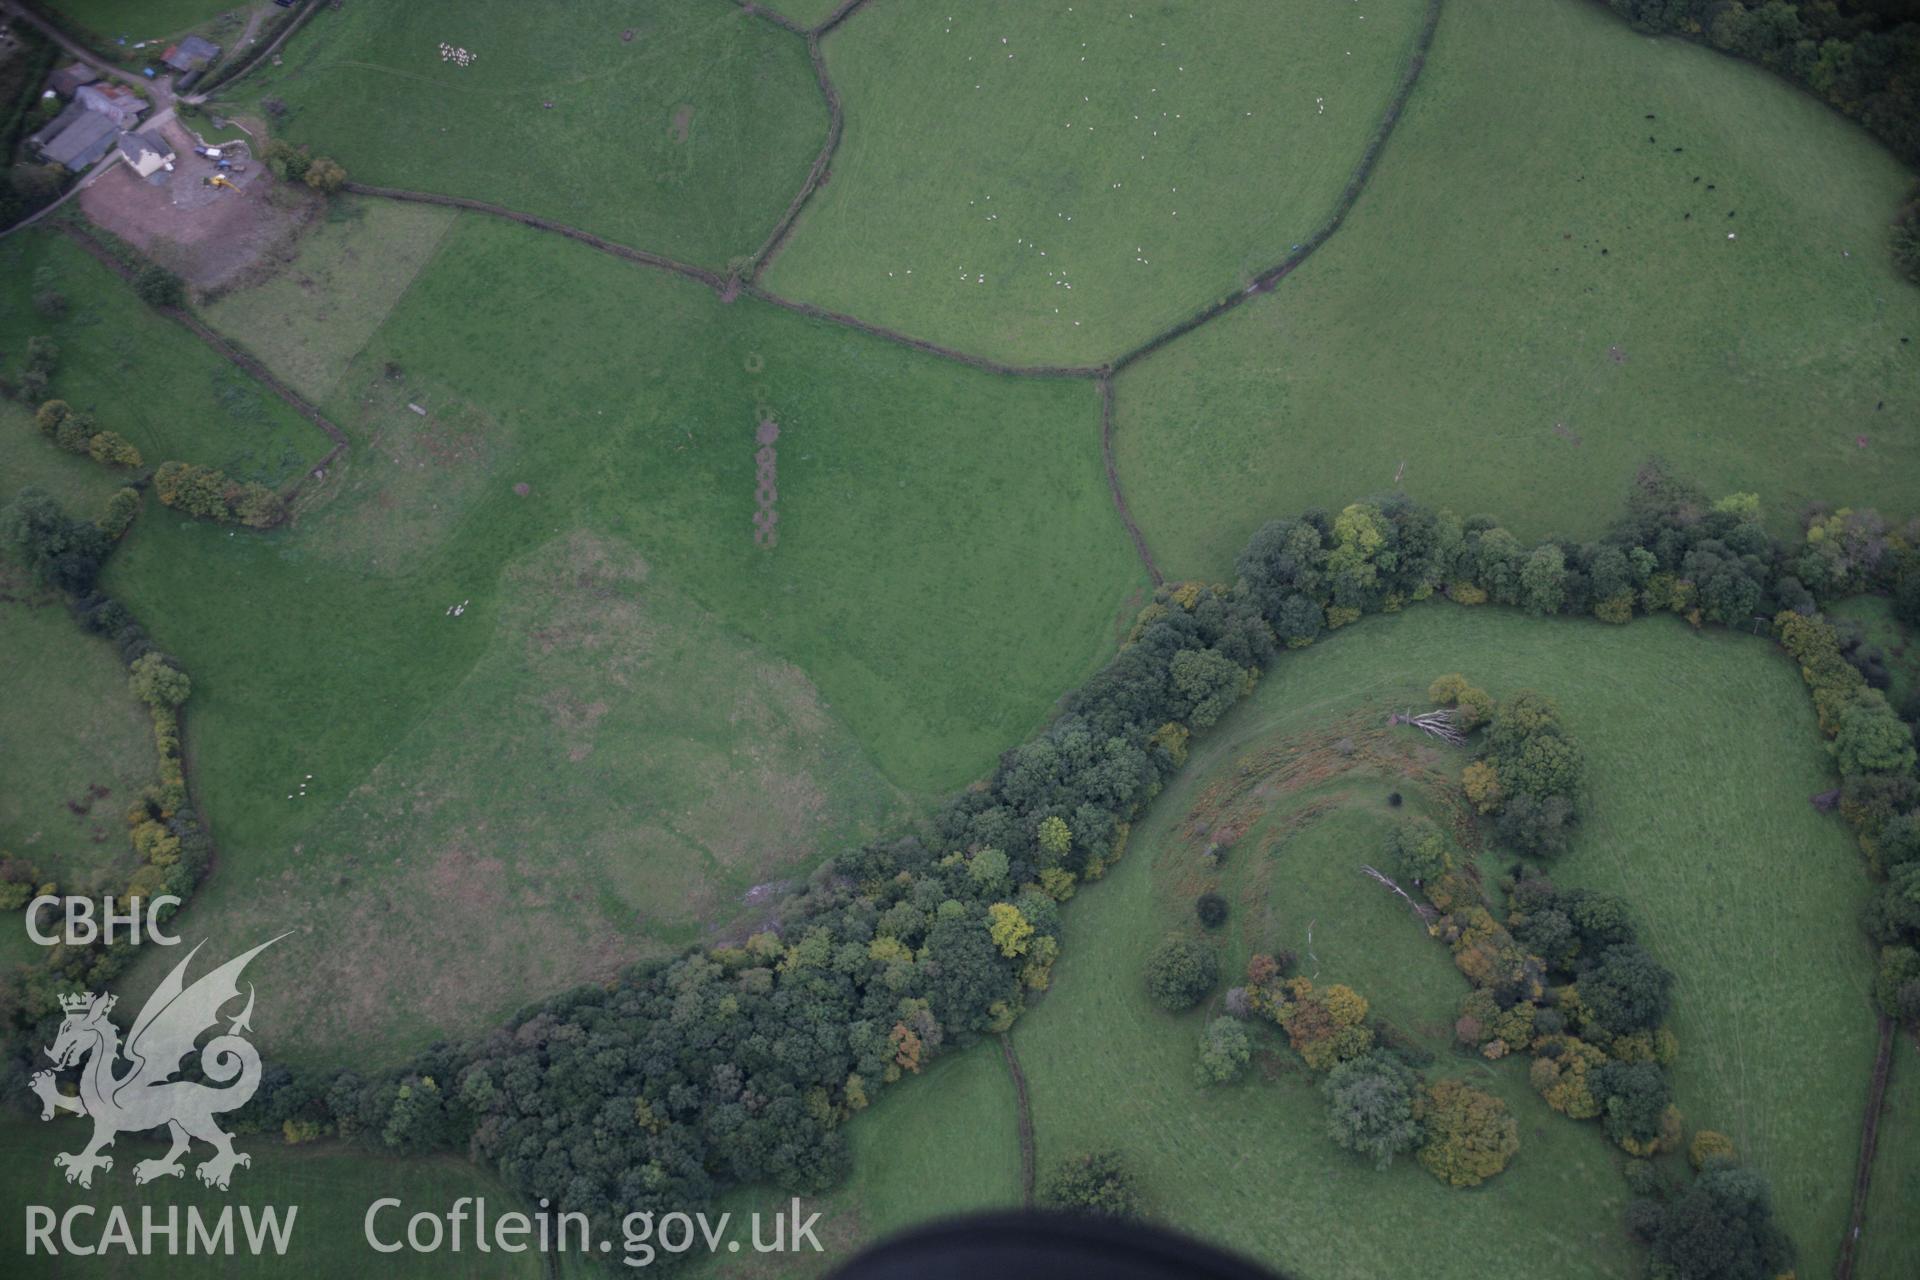 RCAHMW colour oblique aerial photograph of Crickadarn Castle Earthworks from the east showing the marks of cattle feeders in pasture to the west. Taken on 13 October 2005 by Toby Driver